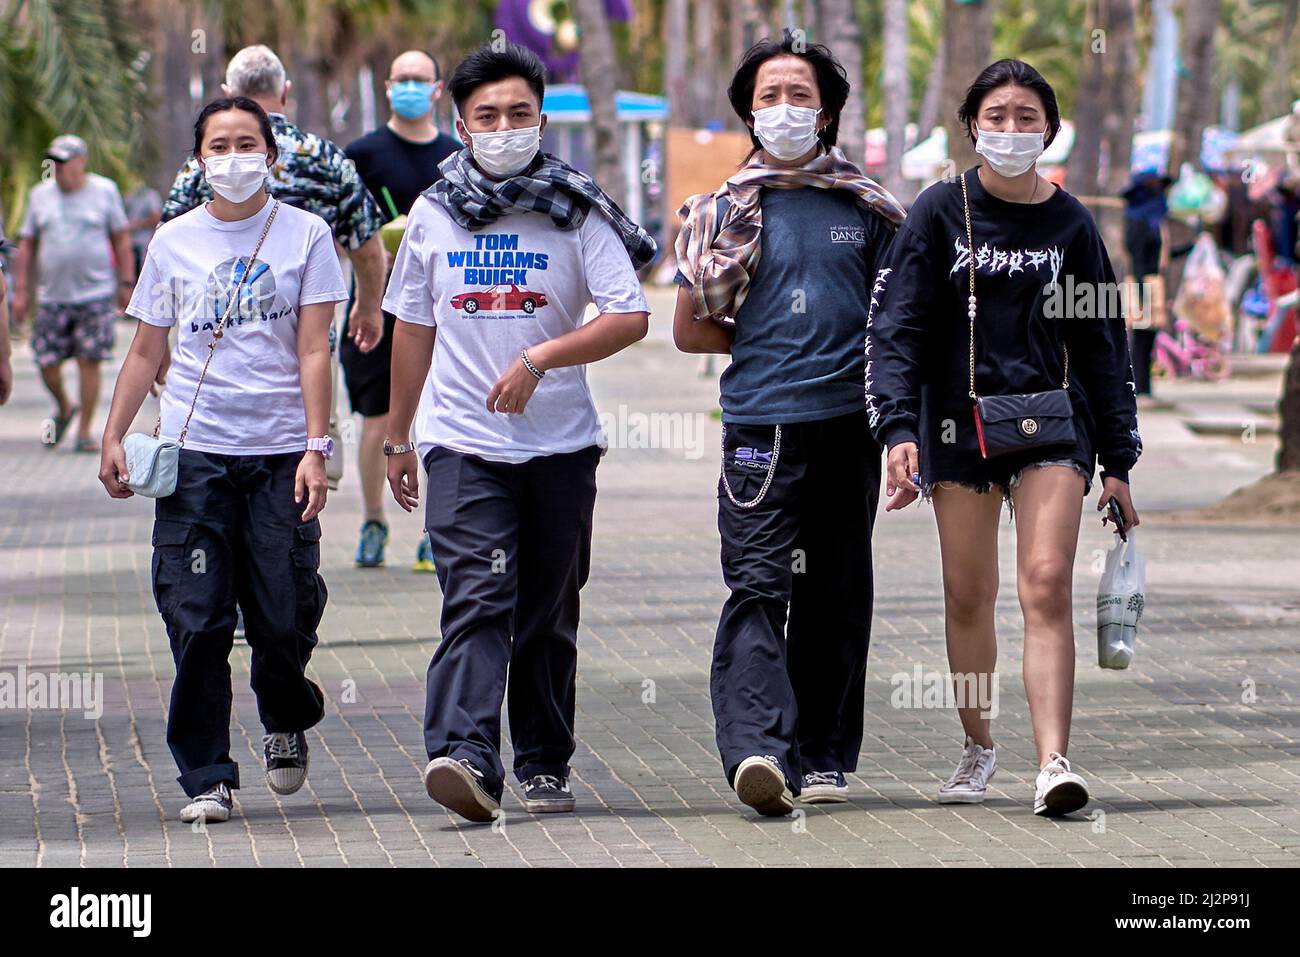 Facemasks people. Couples outdoor walking and all wearing face mask protection against the Covid 19 coronavirus pandemic Stock Photo